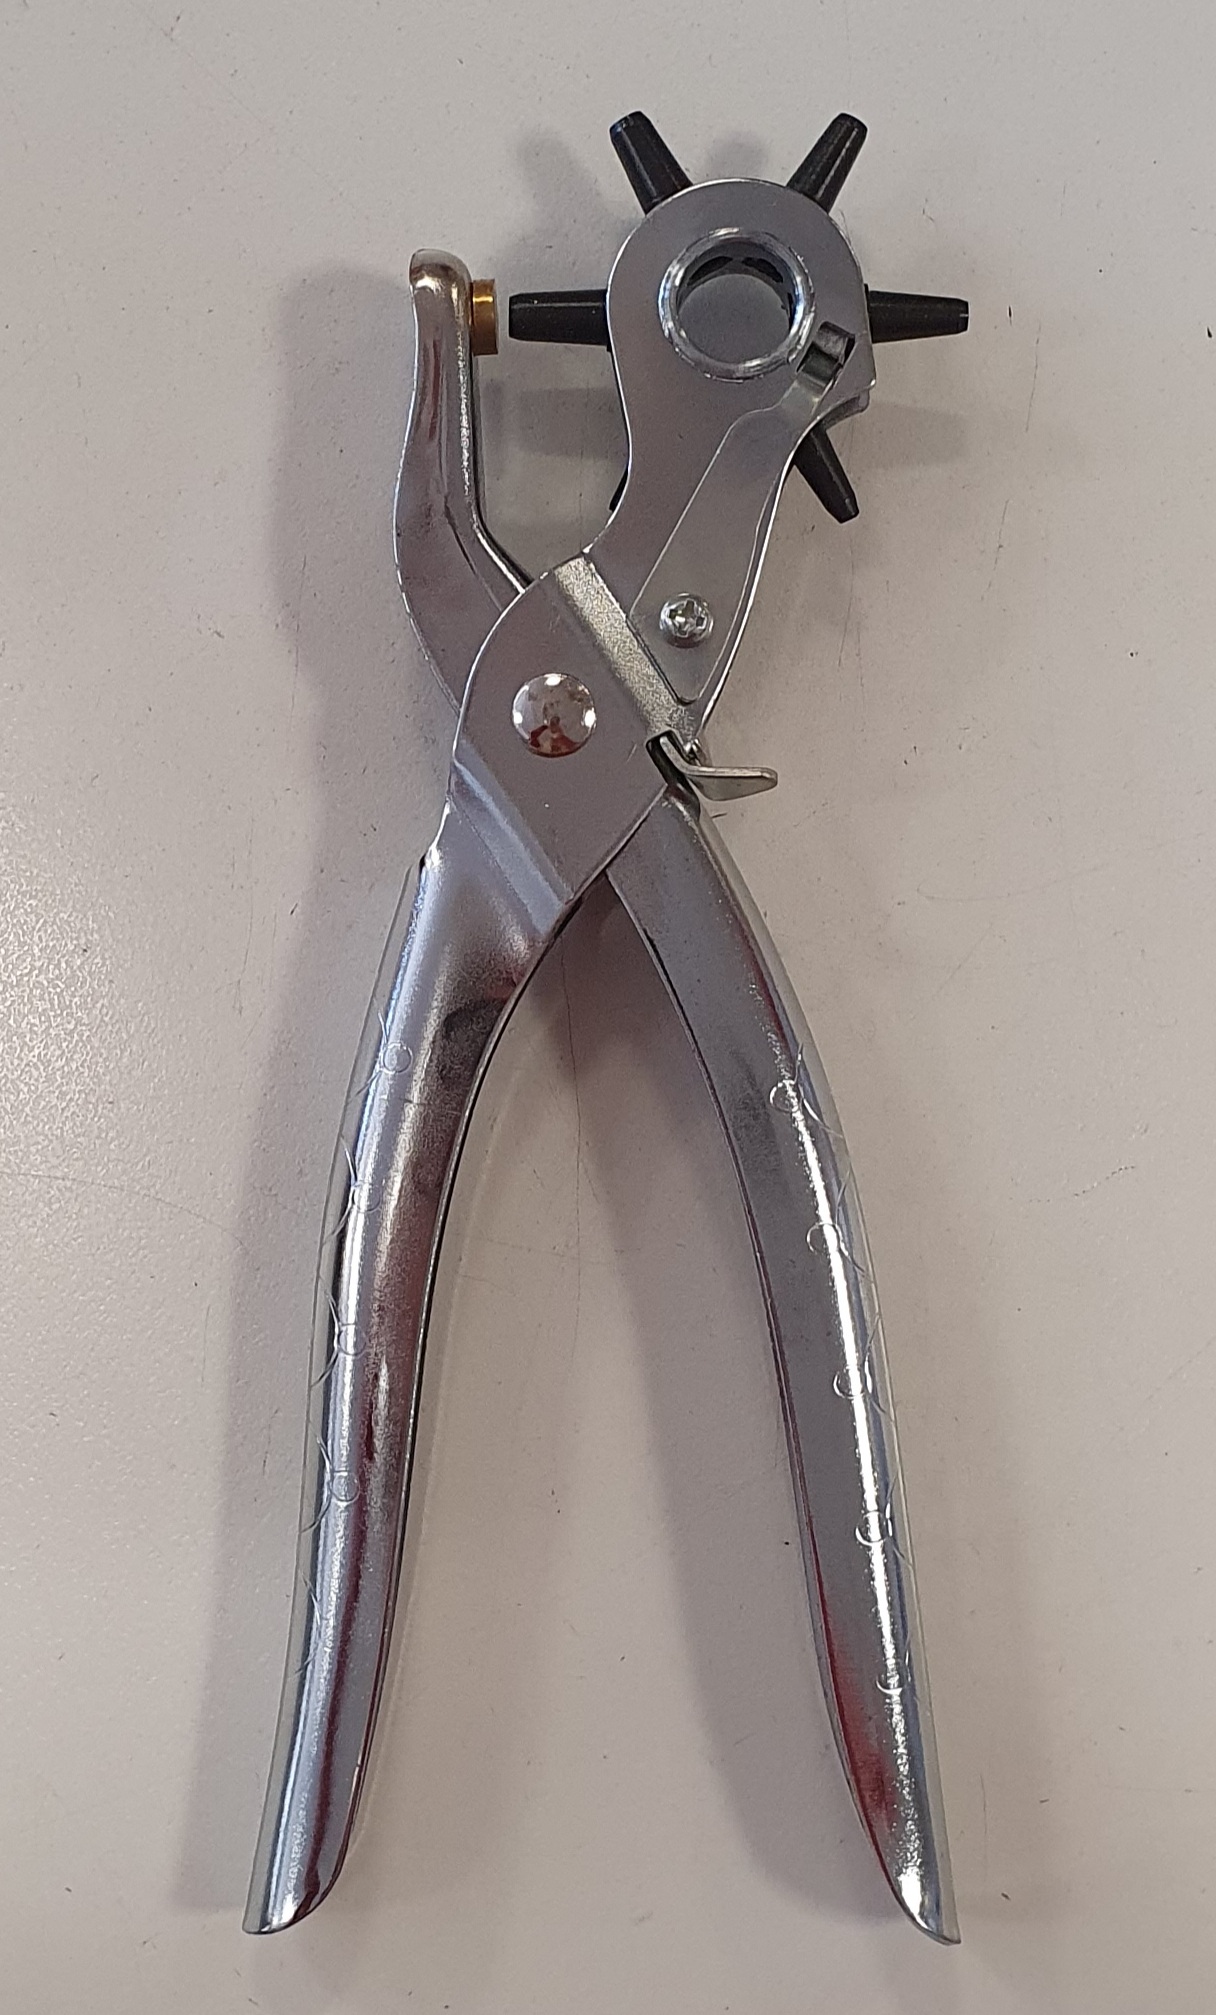 Hole punch plier